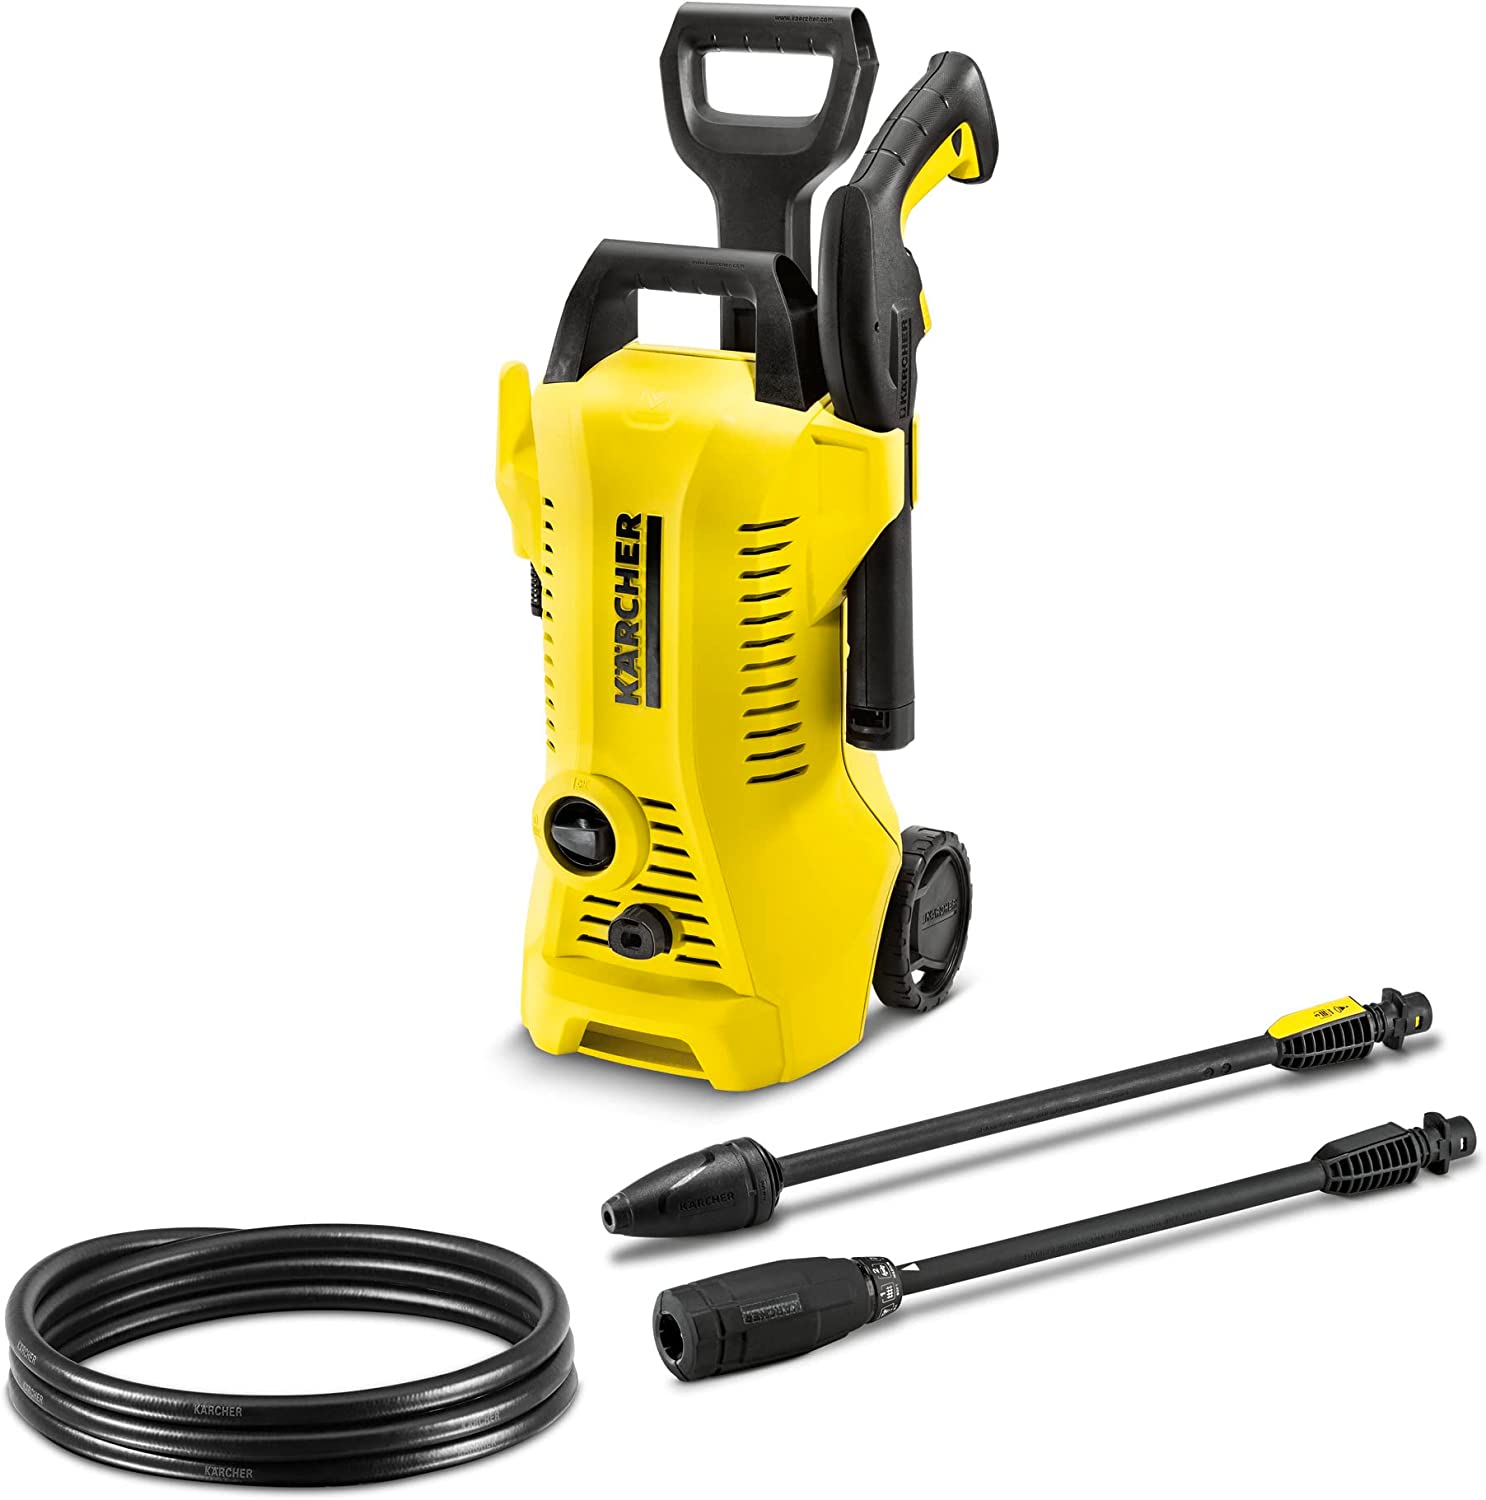 Karcher K 3 Power Control 1800 PSI 1.45 GPM Electric Power Pressure Washer